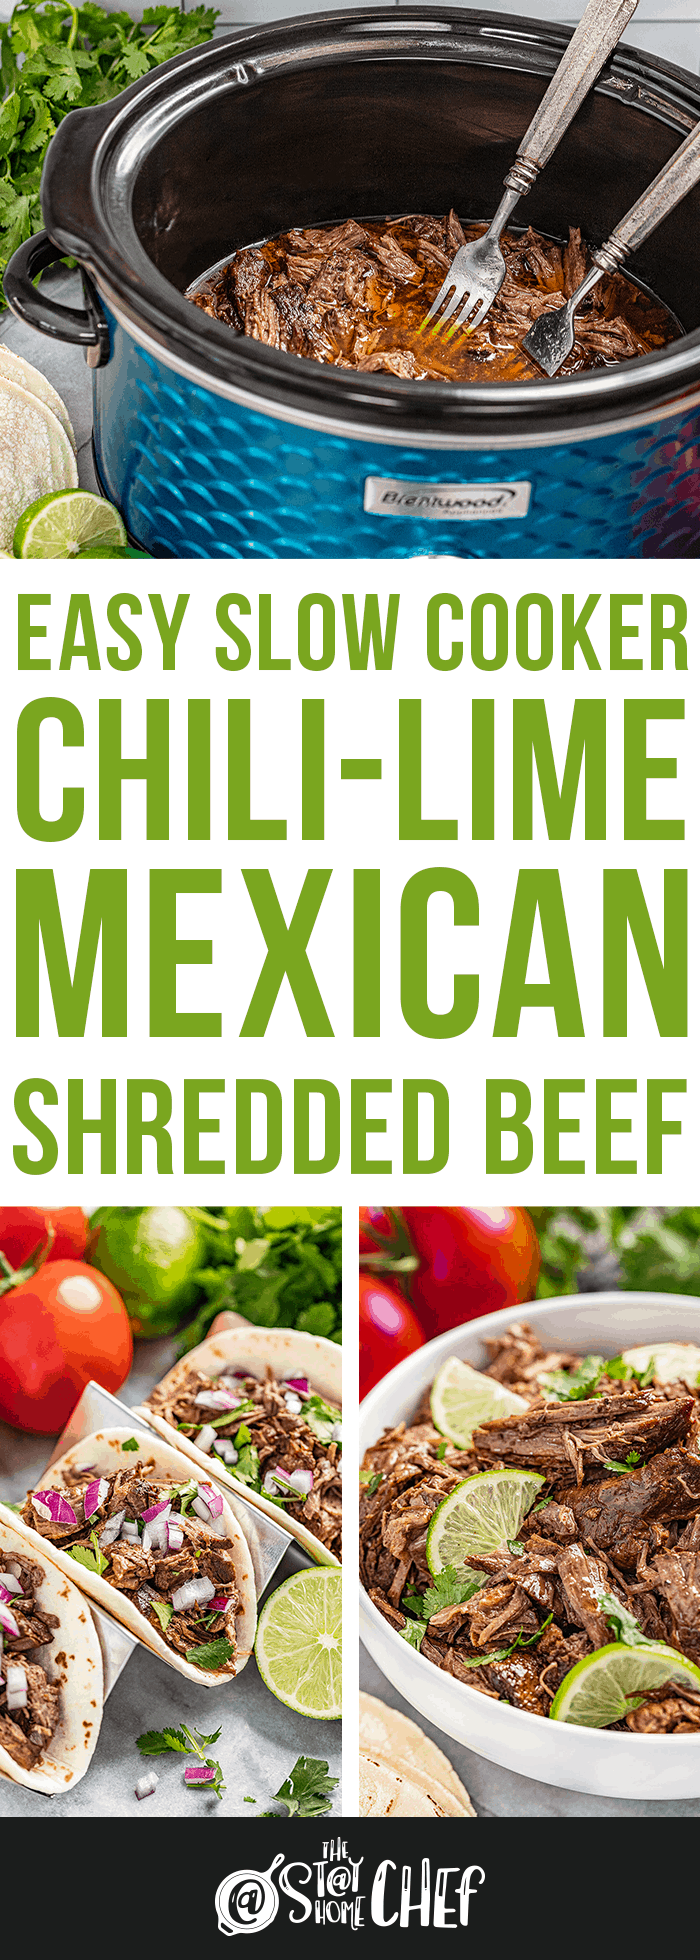 Easy Slow Cooker Chili-Lime Mexican Shredded Beef